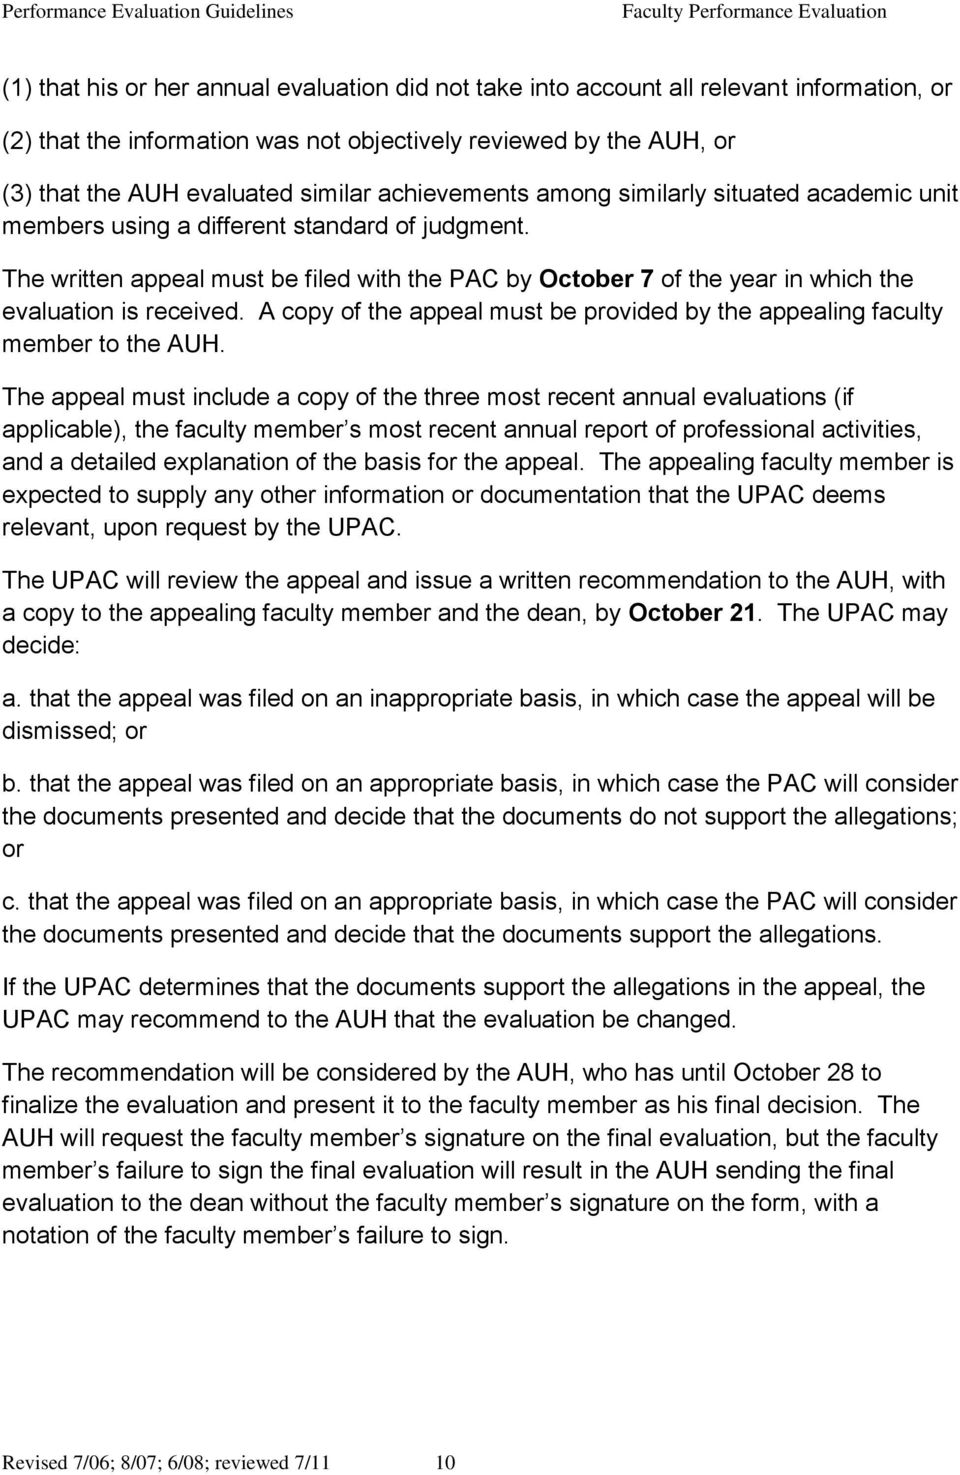 The written appeal must be filed with the PAC by October 7 of the year in which the evaluation is received. A copy of the appeal must be provided by the appealing faculty member to the AUH.